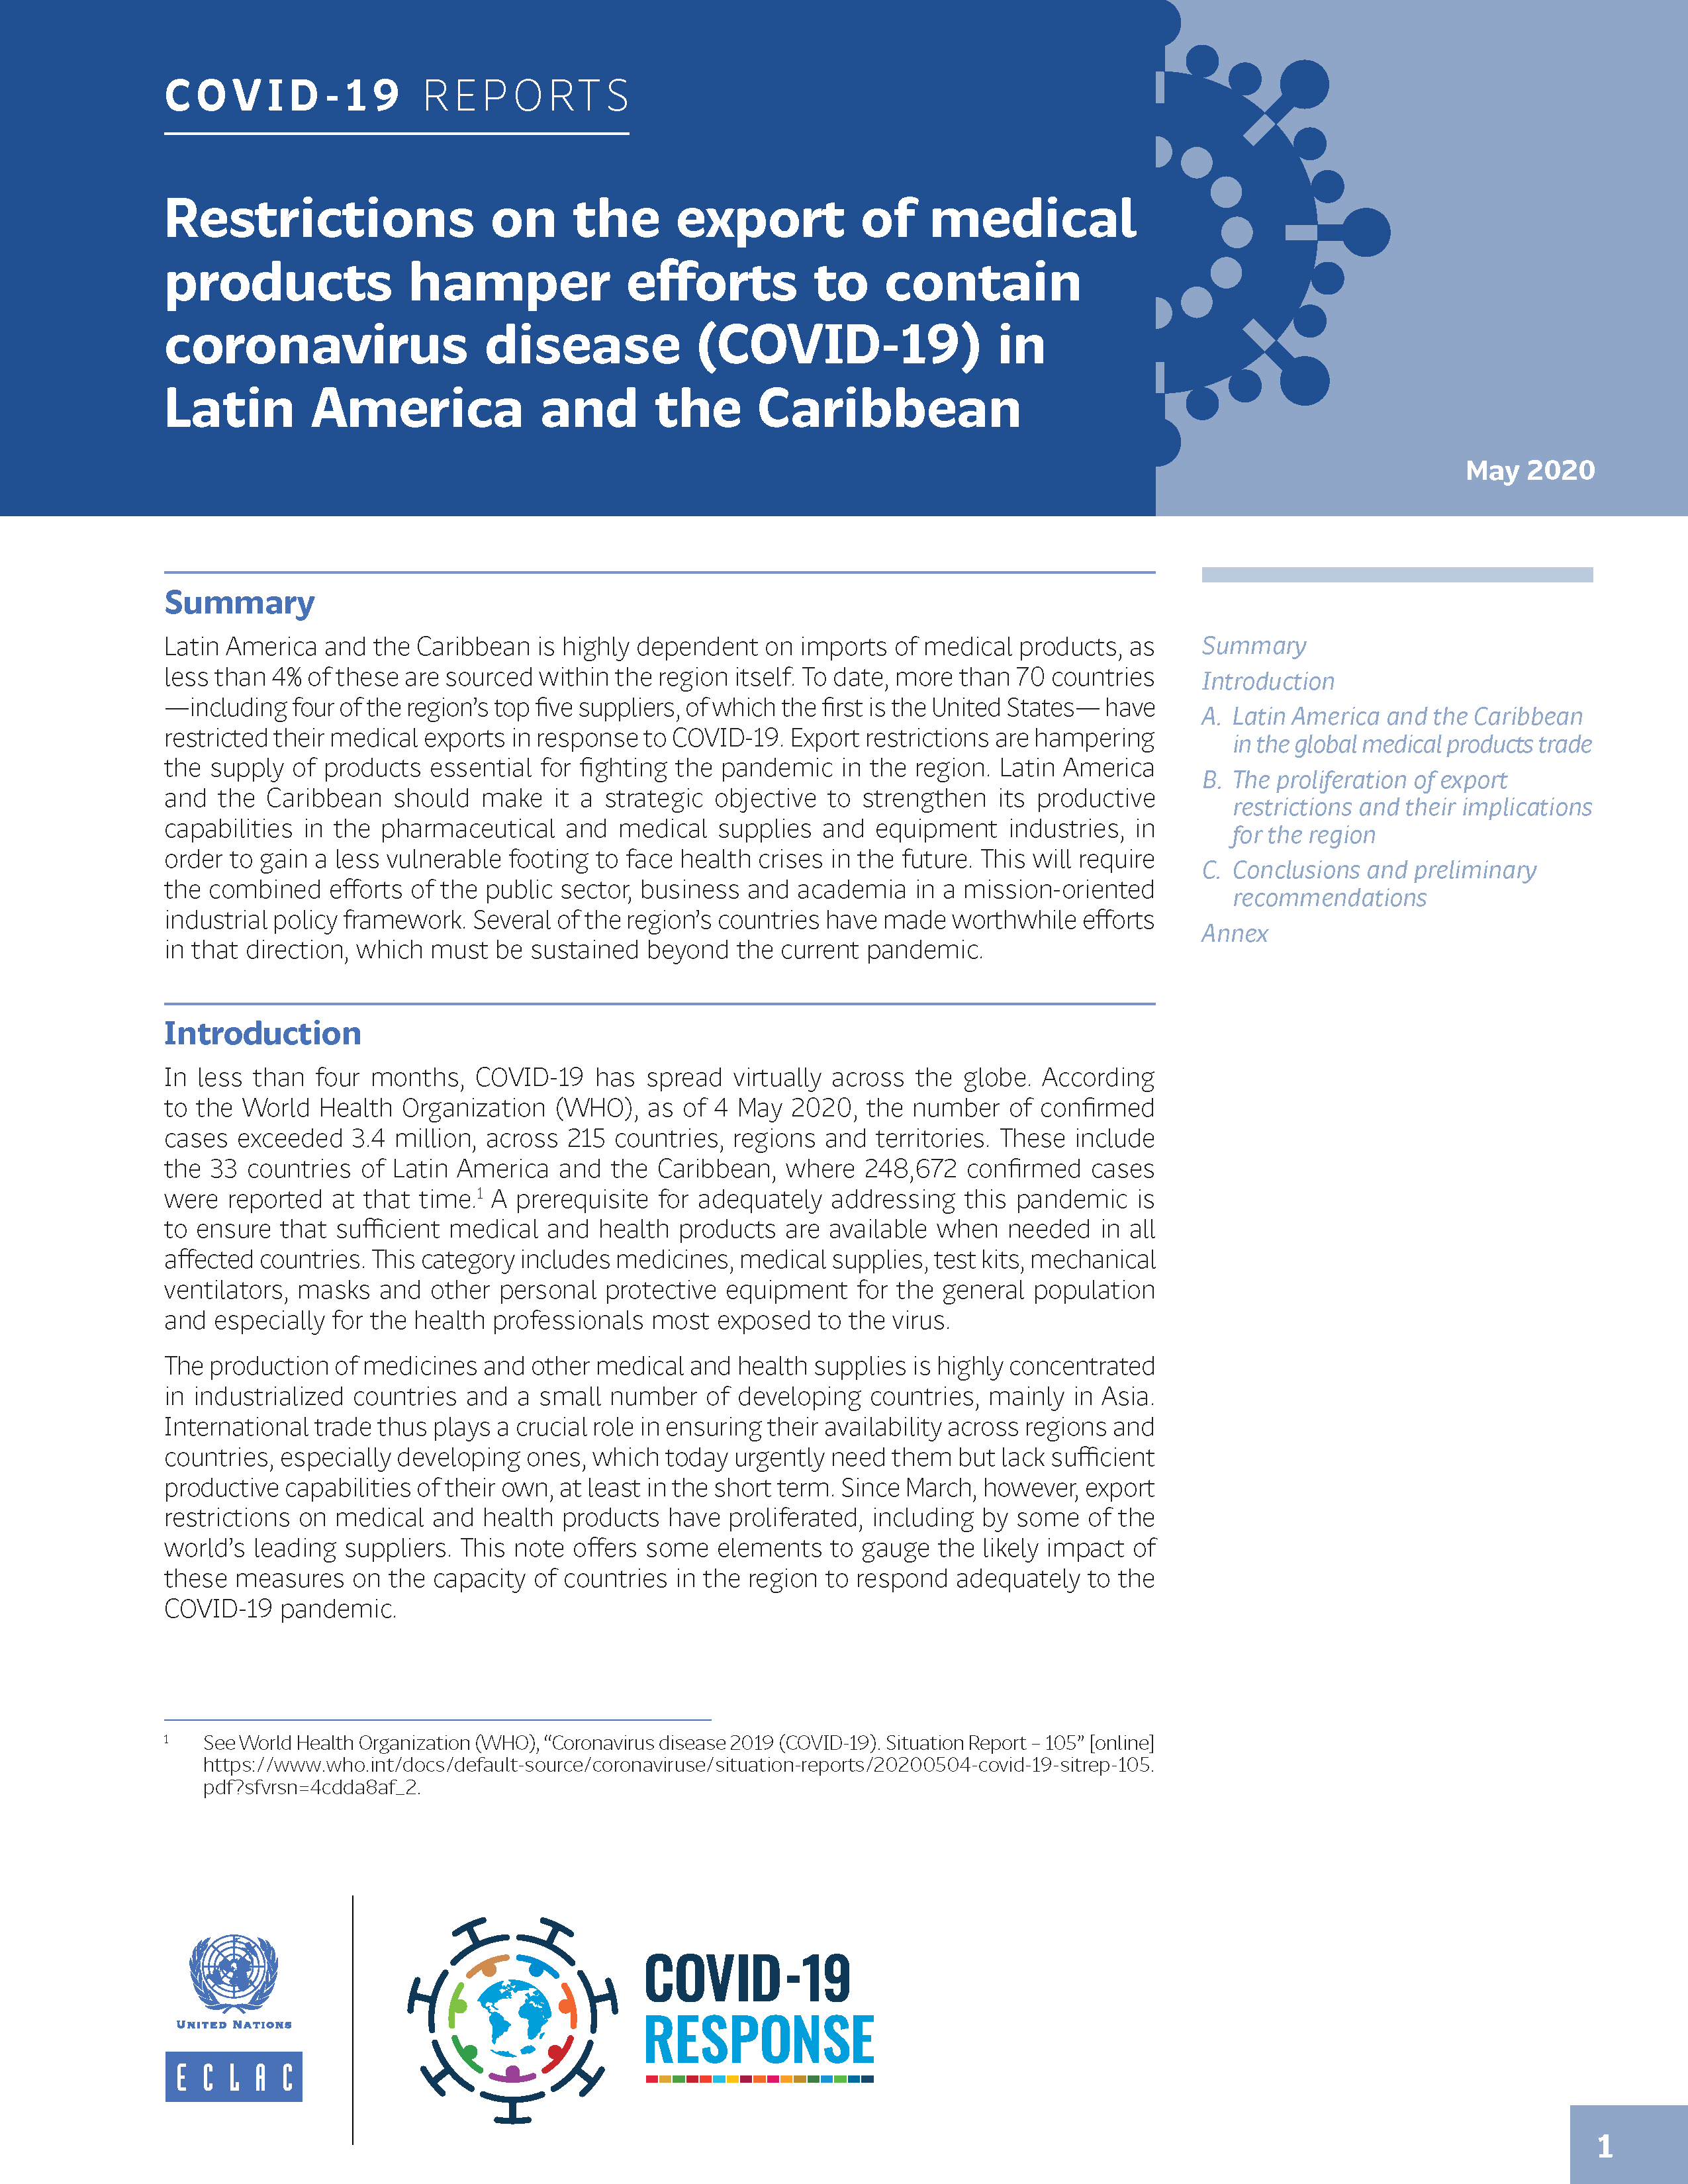 image of Restrictions on the Export of Medical Products Hamper Efforts to Contain Coronavirus Disease (COVID-19) in Latin America and the Caribbean